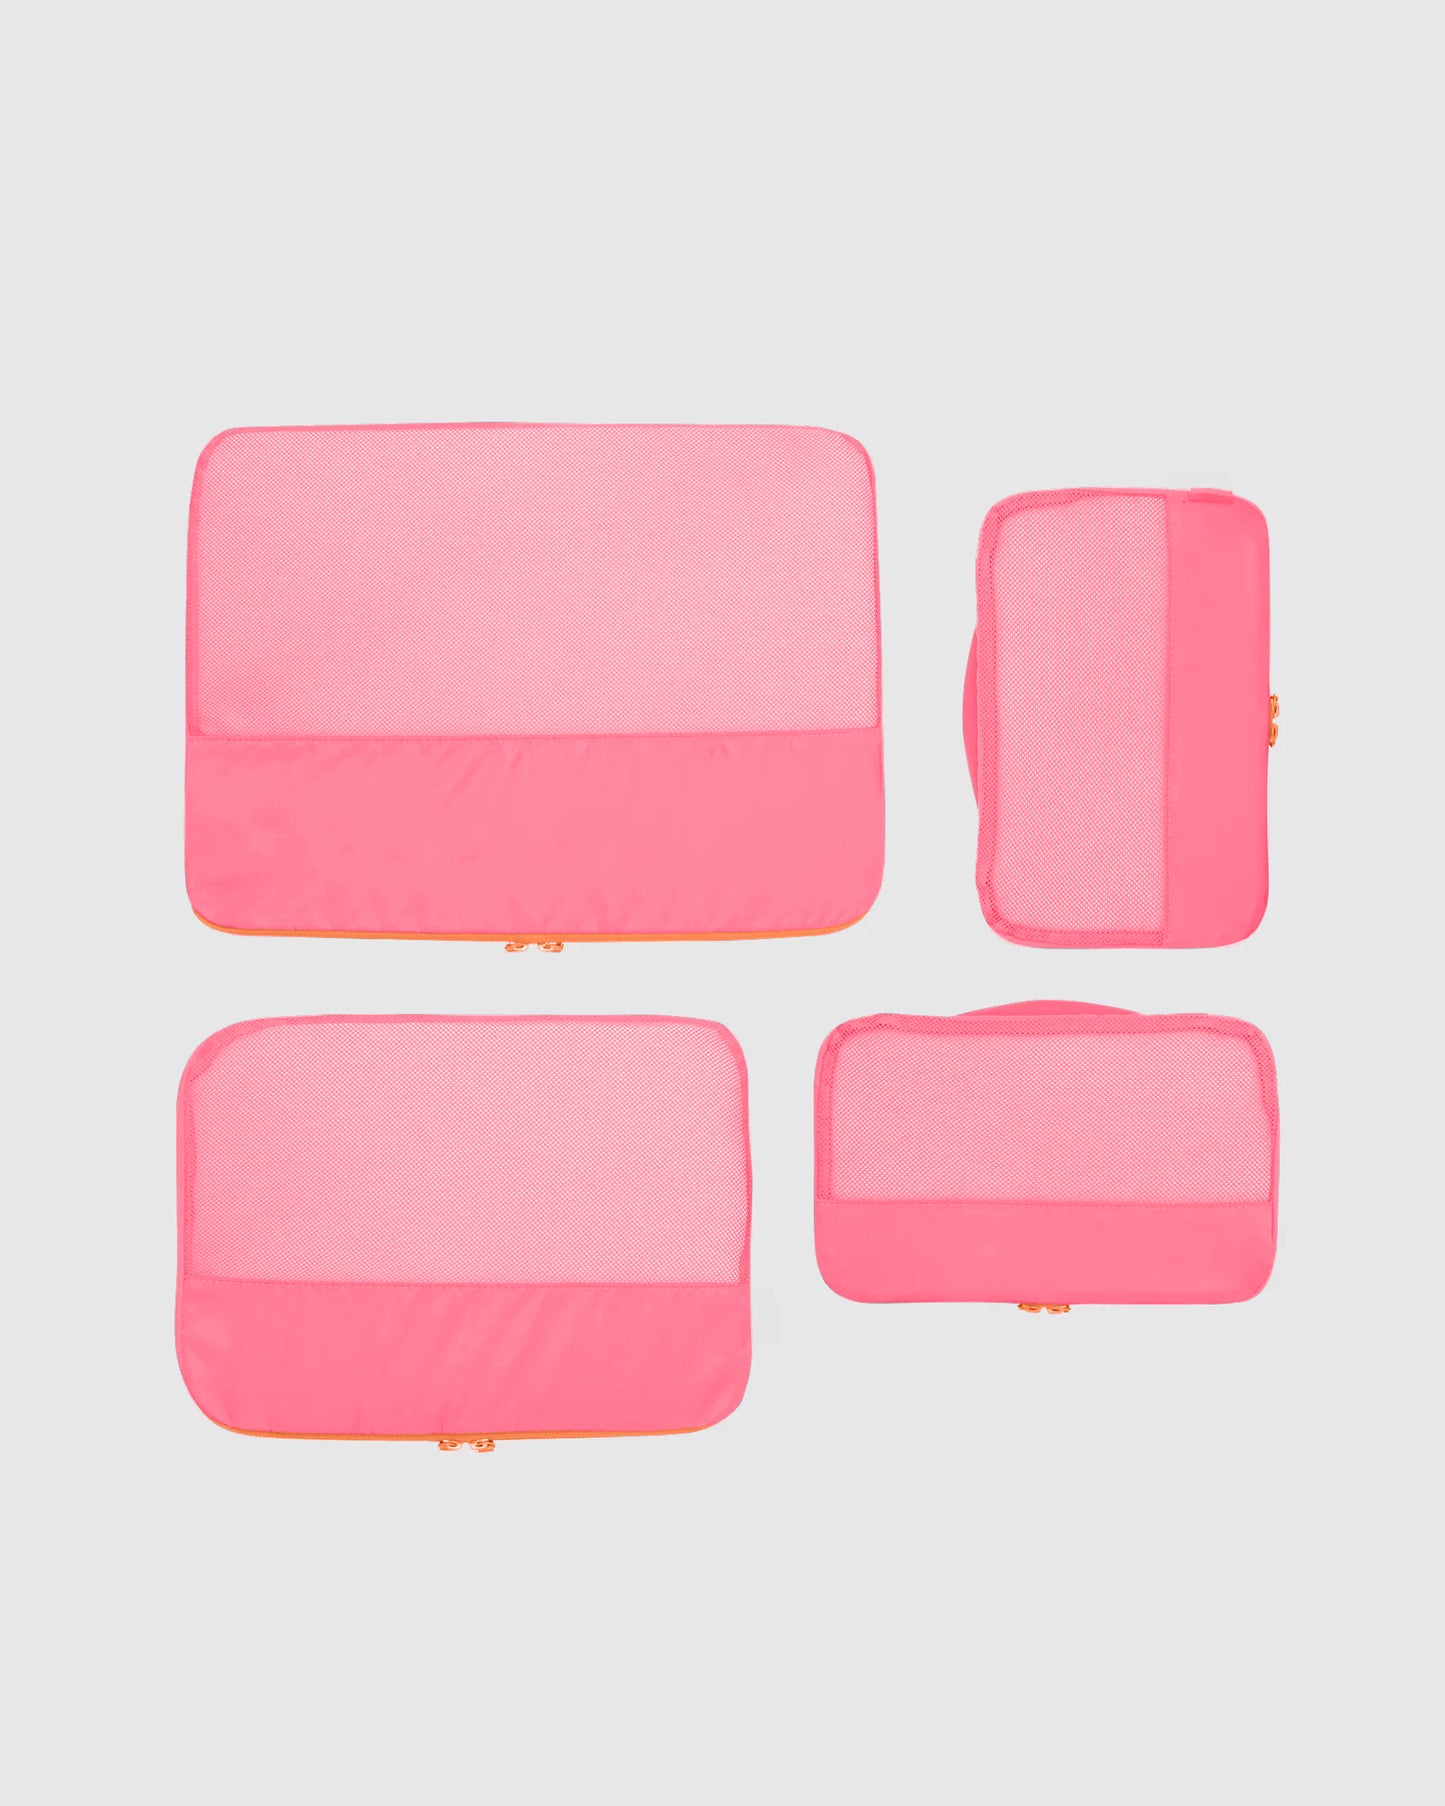 Flamingo Pink Neon Limited Edition 4 Piece Packing Cube